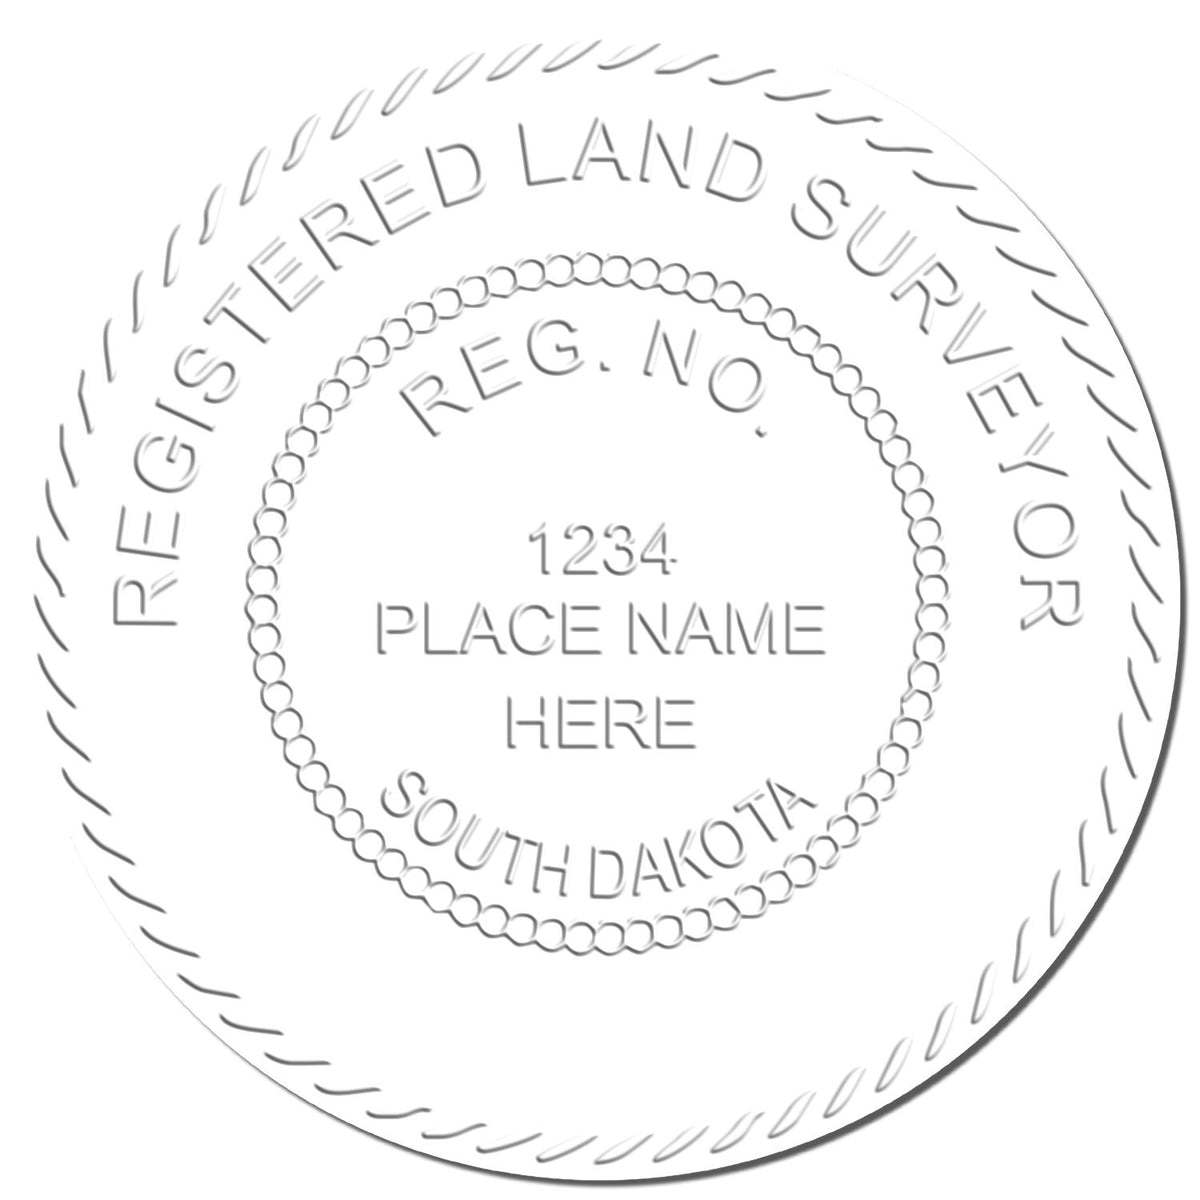 This paper is stamped with a sample imprint of the State of South Dakota Soft Land Surveyor Embossing Seal, signifying its quality and reliability.